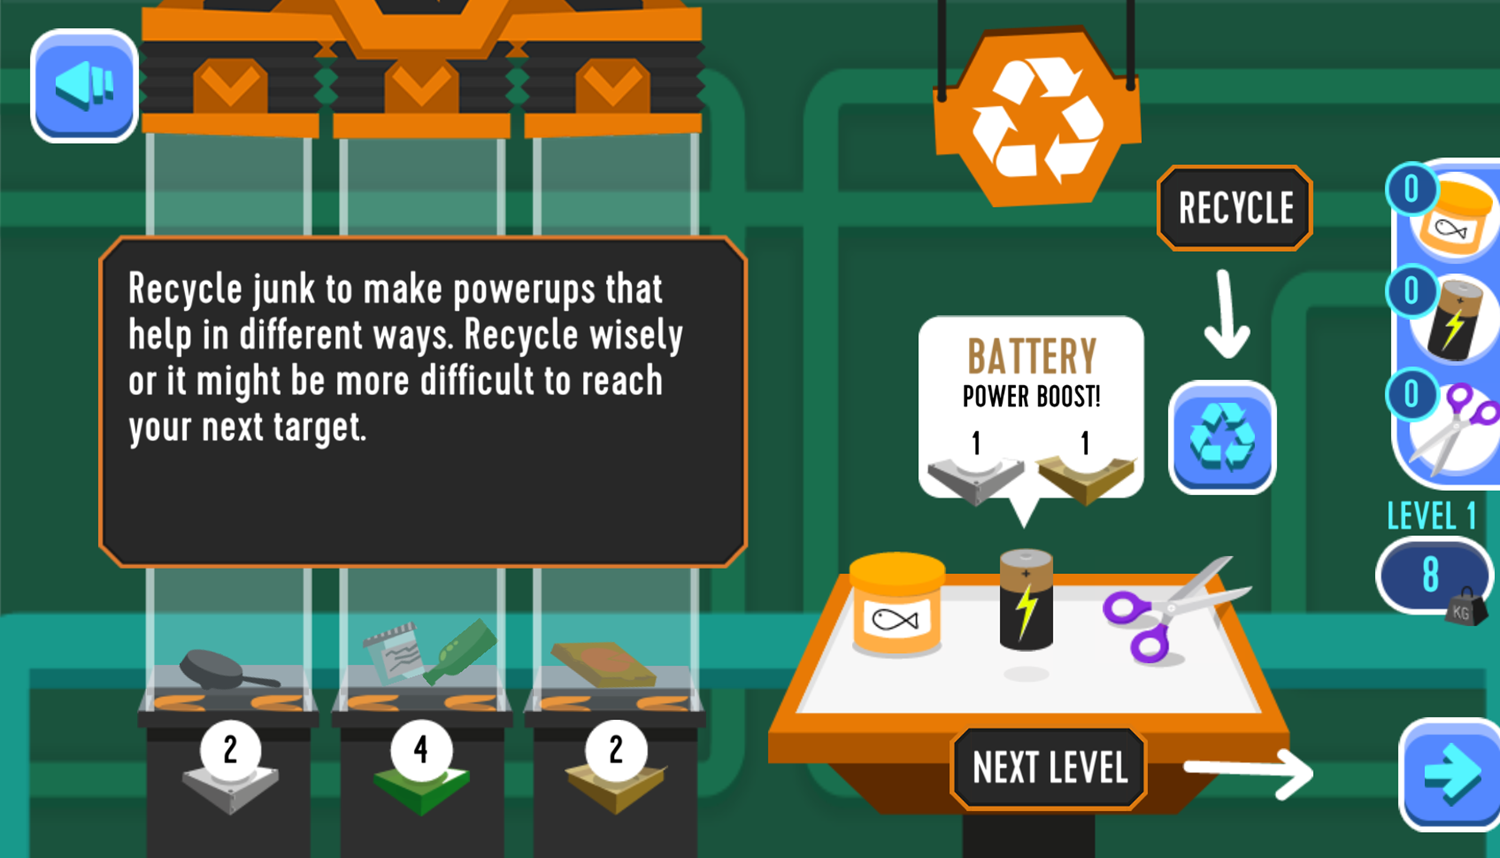 Tom and Jerry River Recycle Game Power Ups Screenshot.